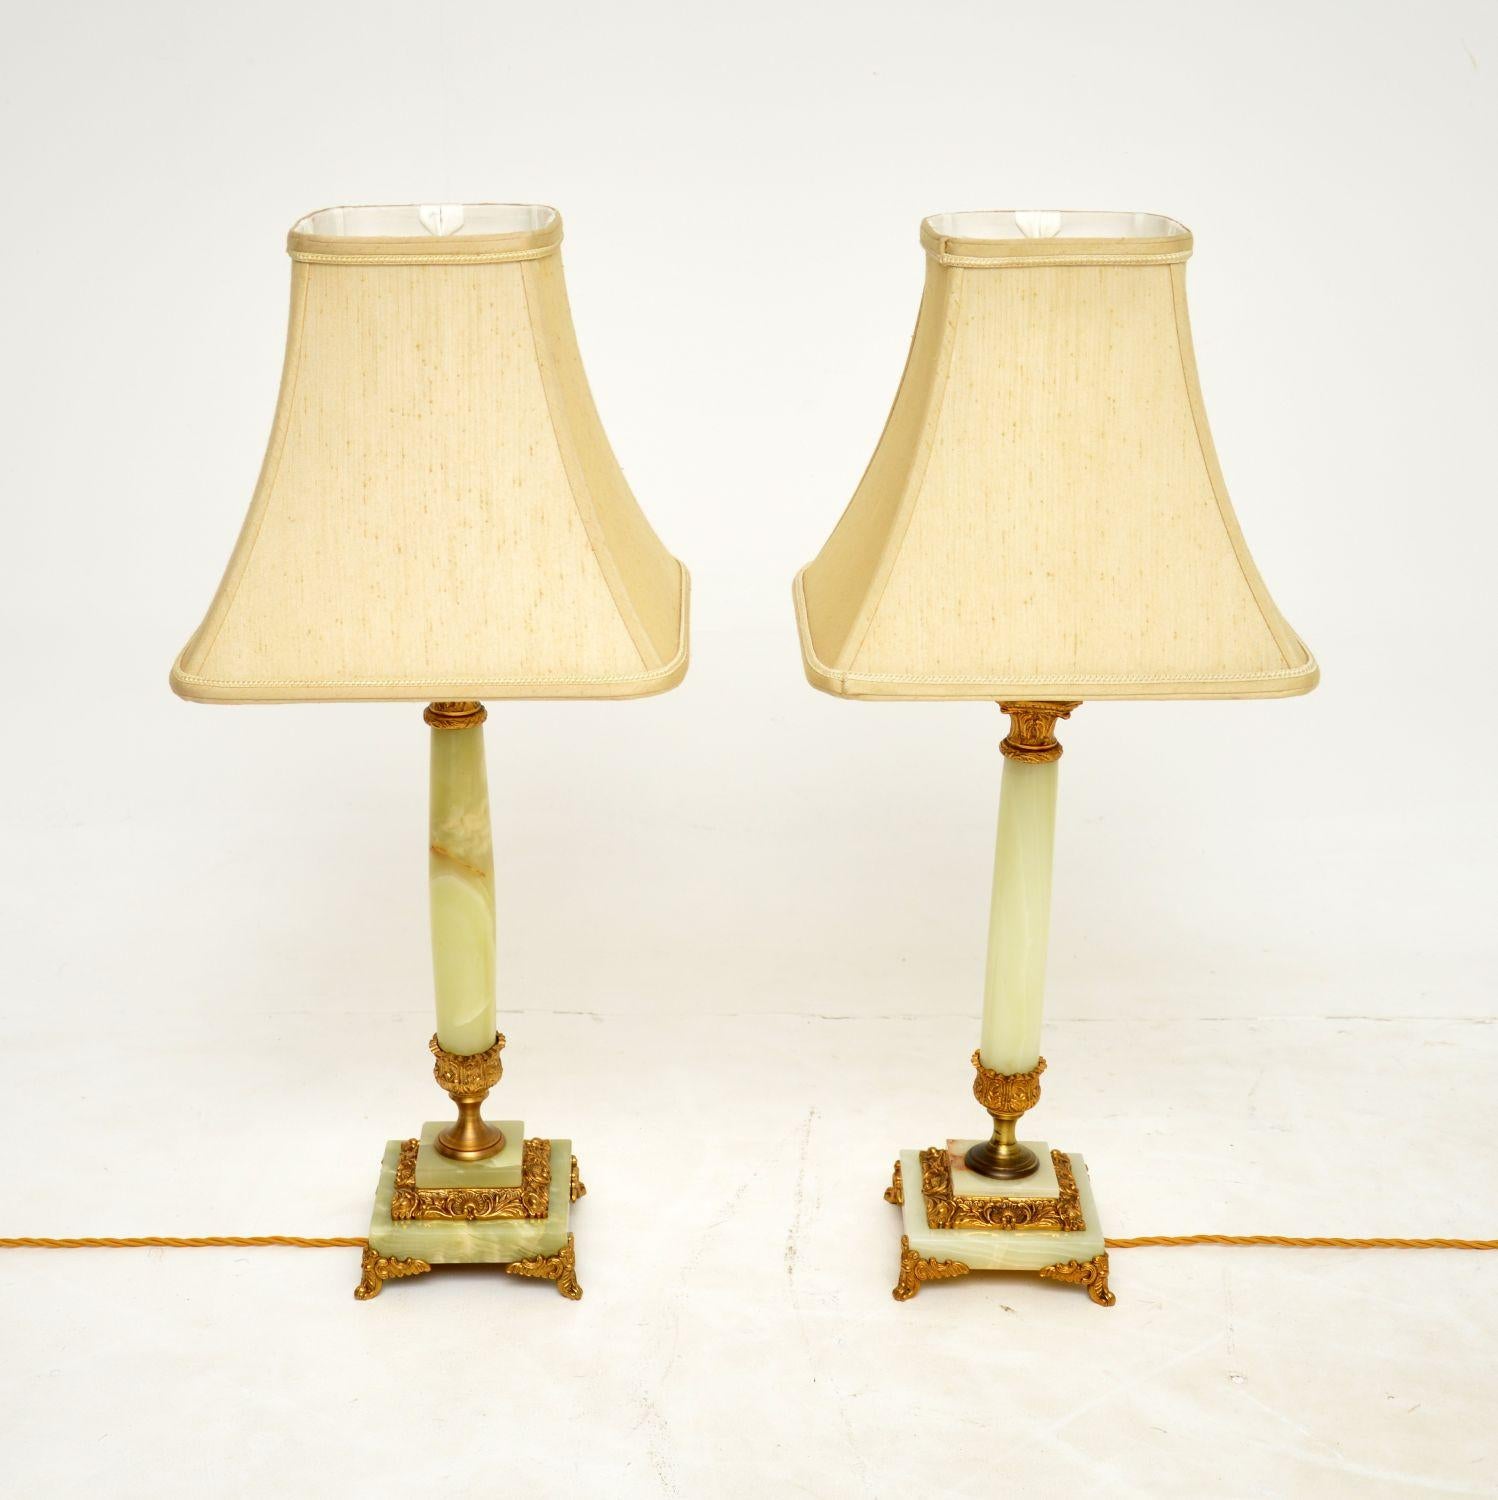 English Pair of Antique Neoclassical Style Brass & Onyx Table Lamps